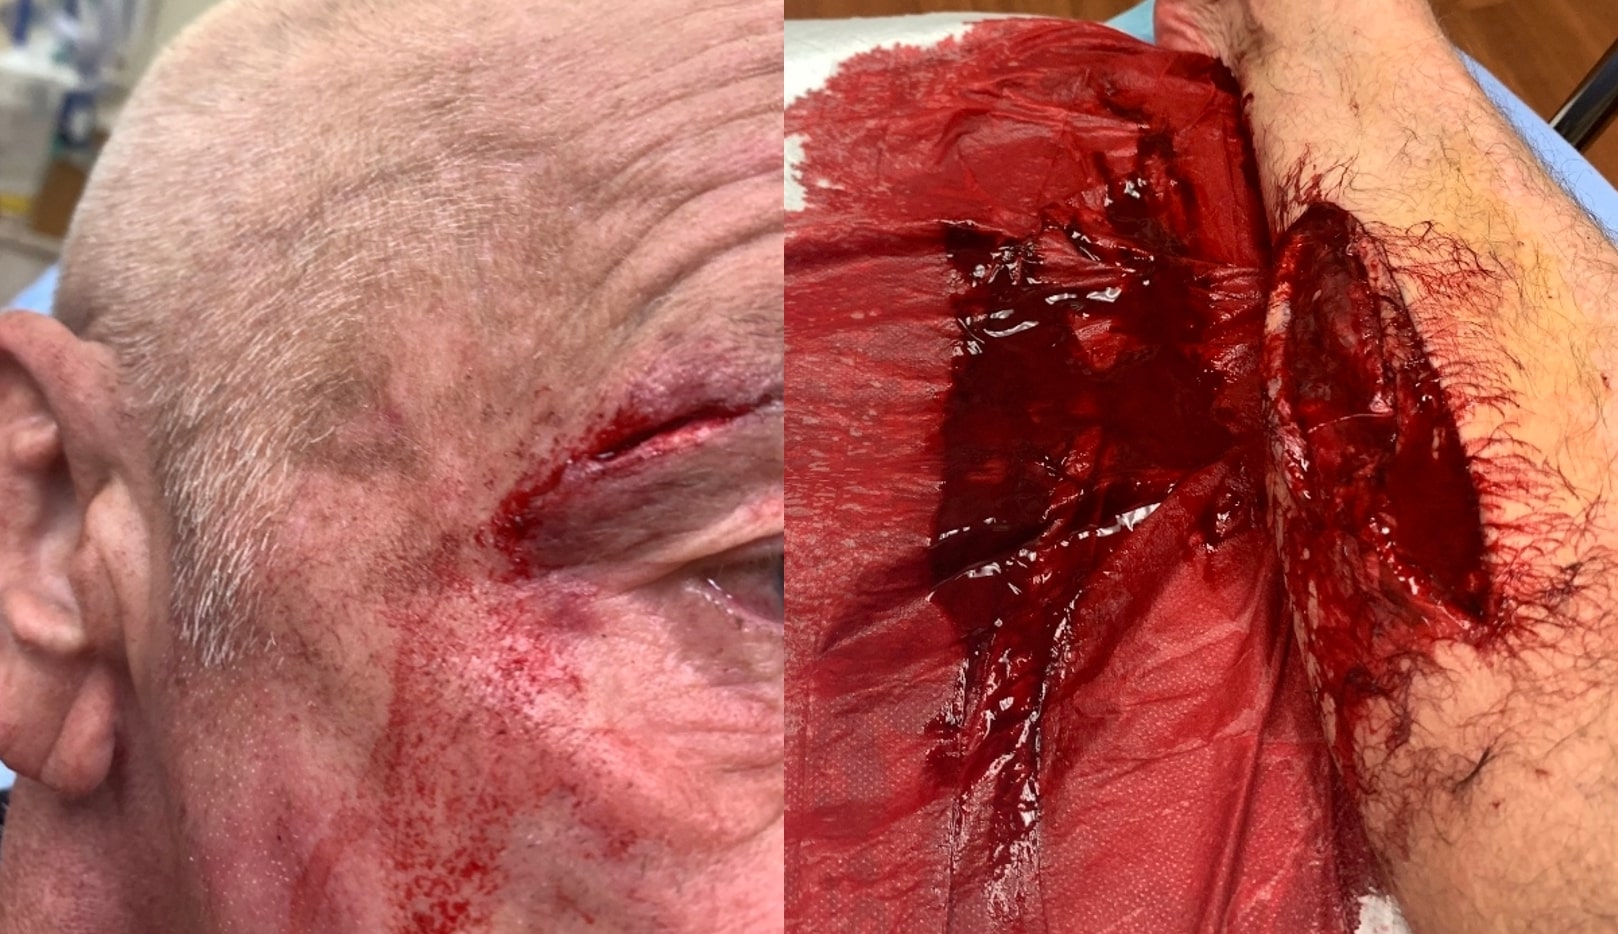 Head and leg wounds